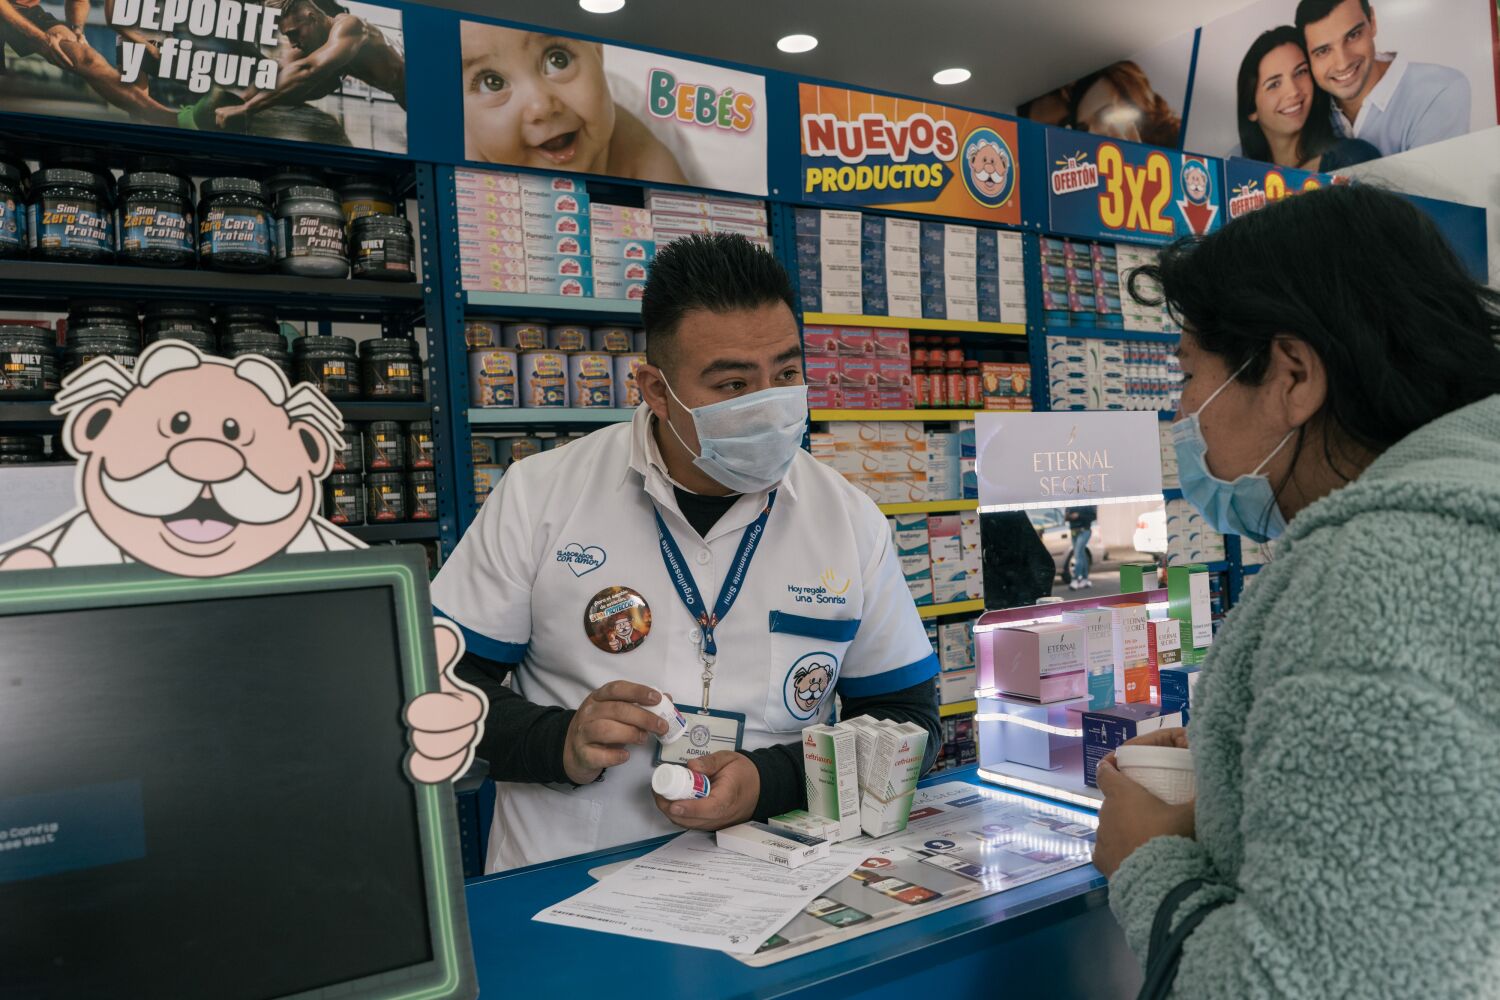 Mexico promised healthcare for all. Its failure to deliver made this smiling mascot famous